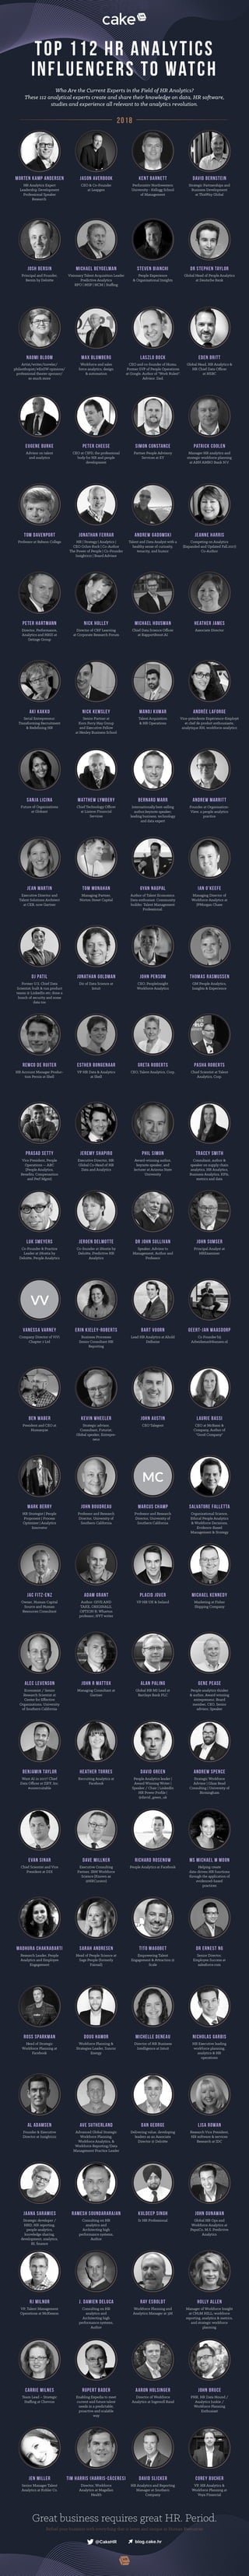 Introducing you to the top 112 HR Analytics experts [infographic]